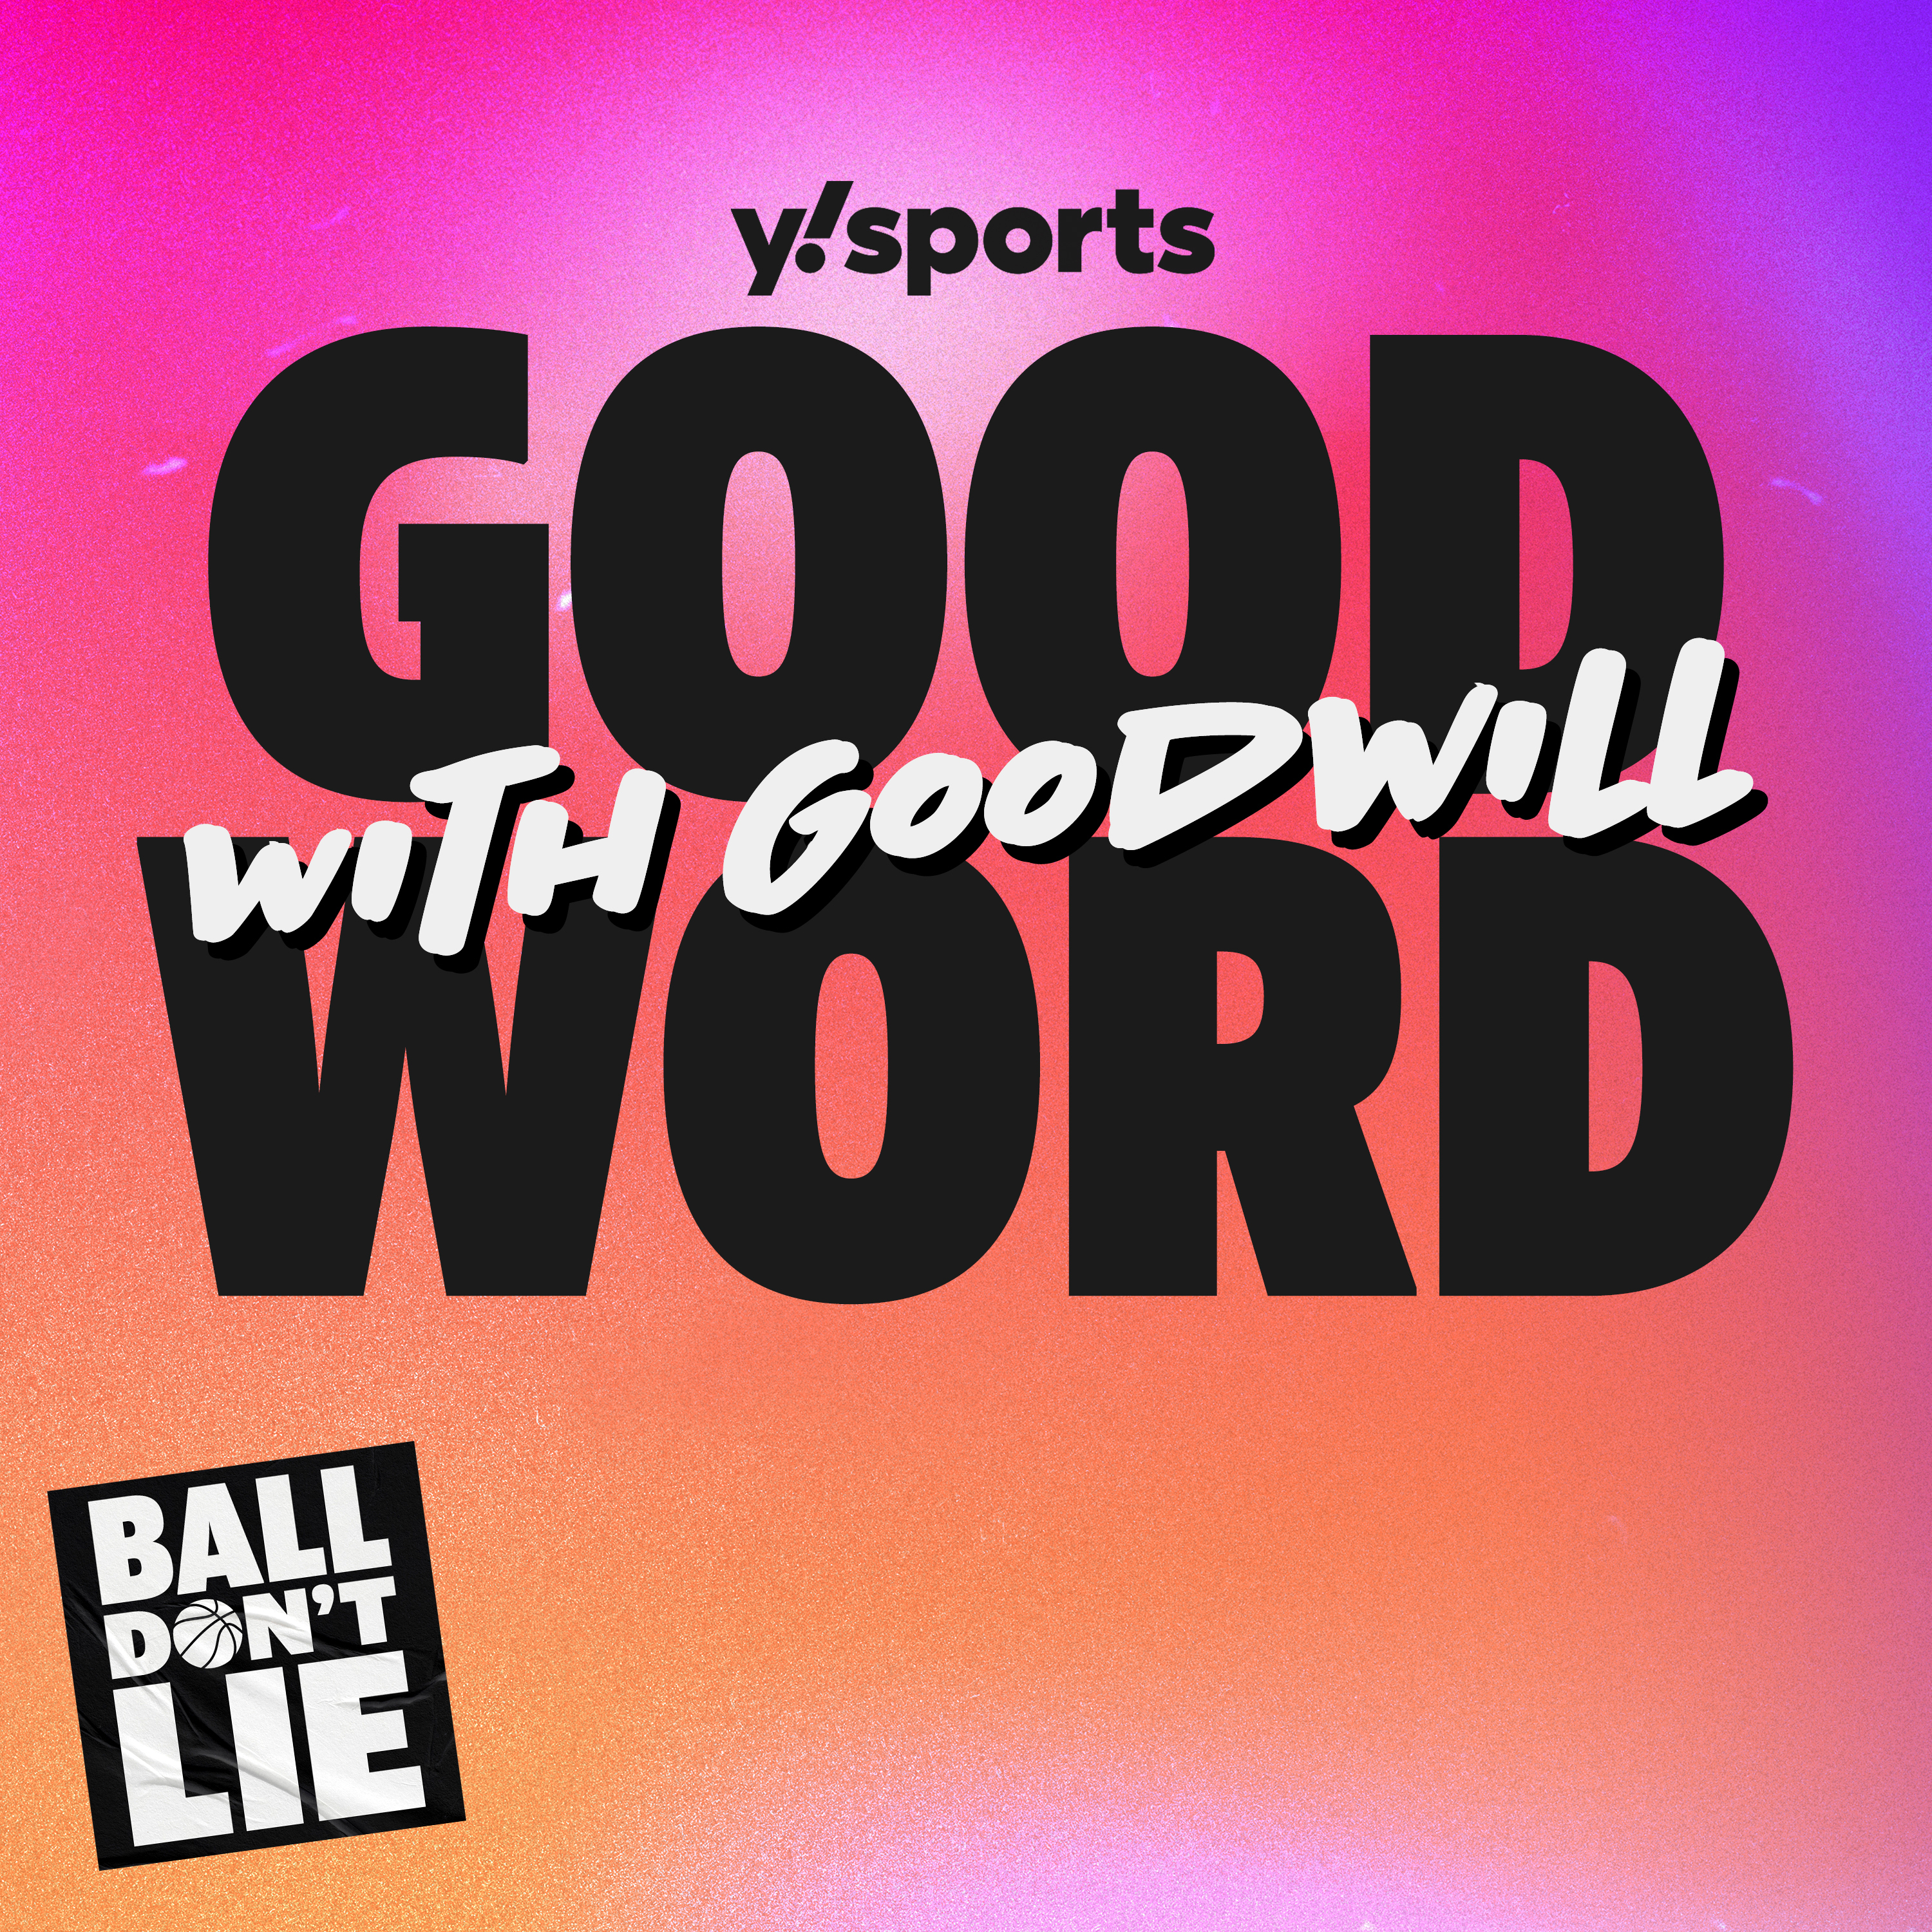 Lakers advance, Warriors dynasty is over & Western Conference playoffs preview | Good Word with Goodwill